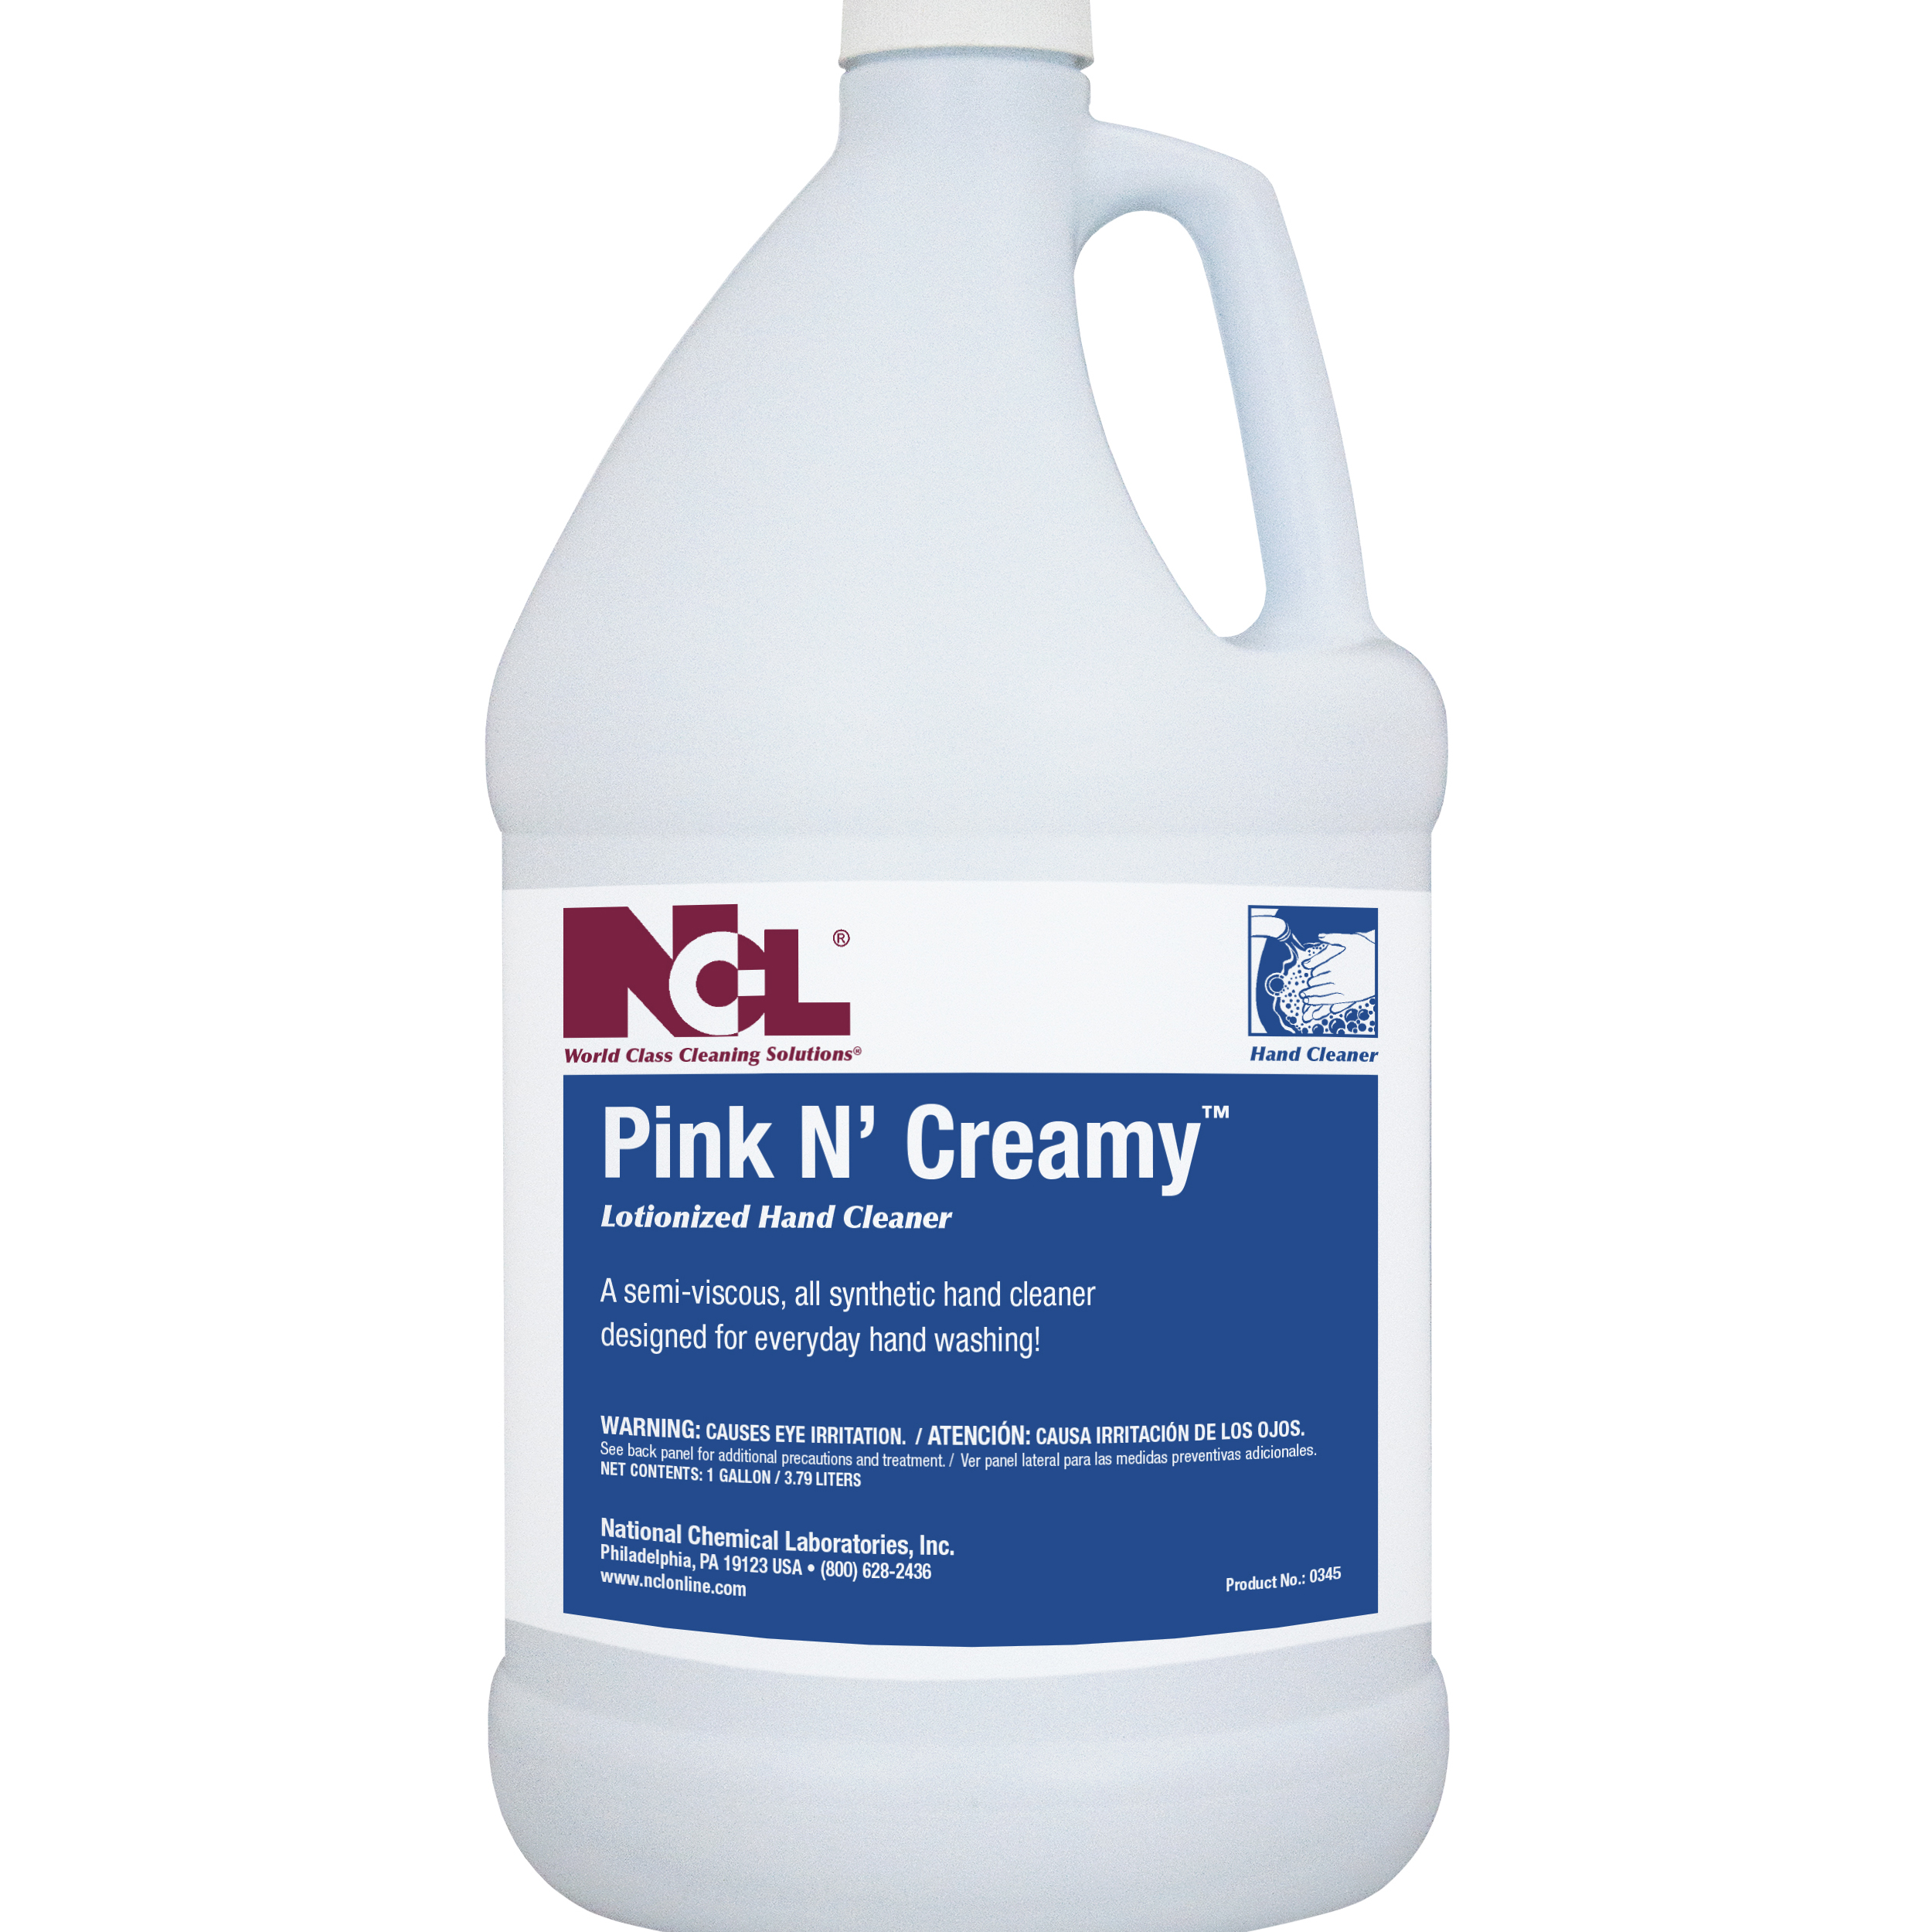  PINK N' CREAMY Lotionized Hand Cleaner 4/1 Gal. Case (NCL0345-29) 